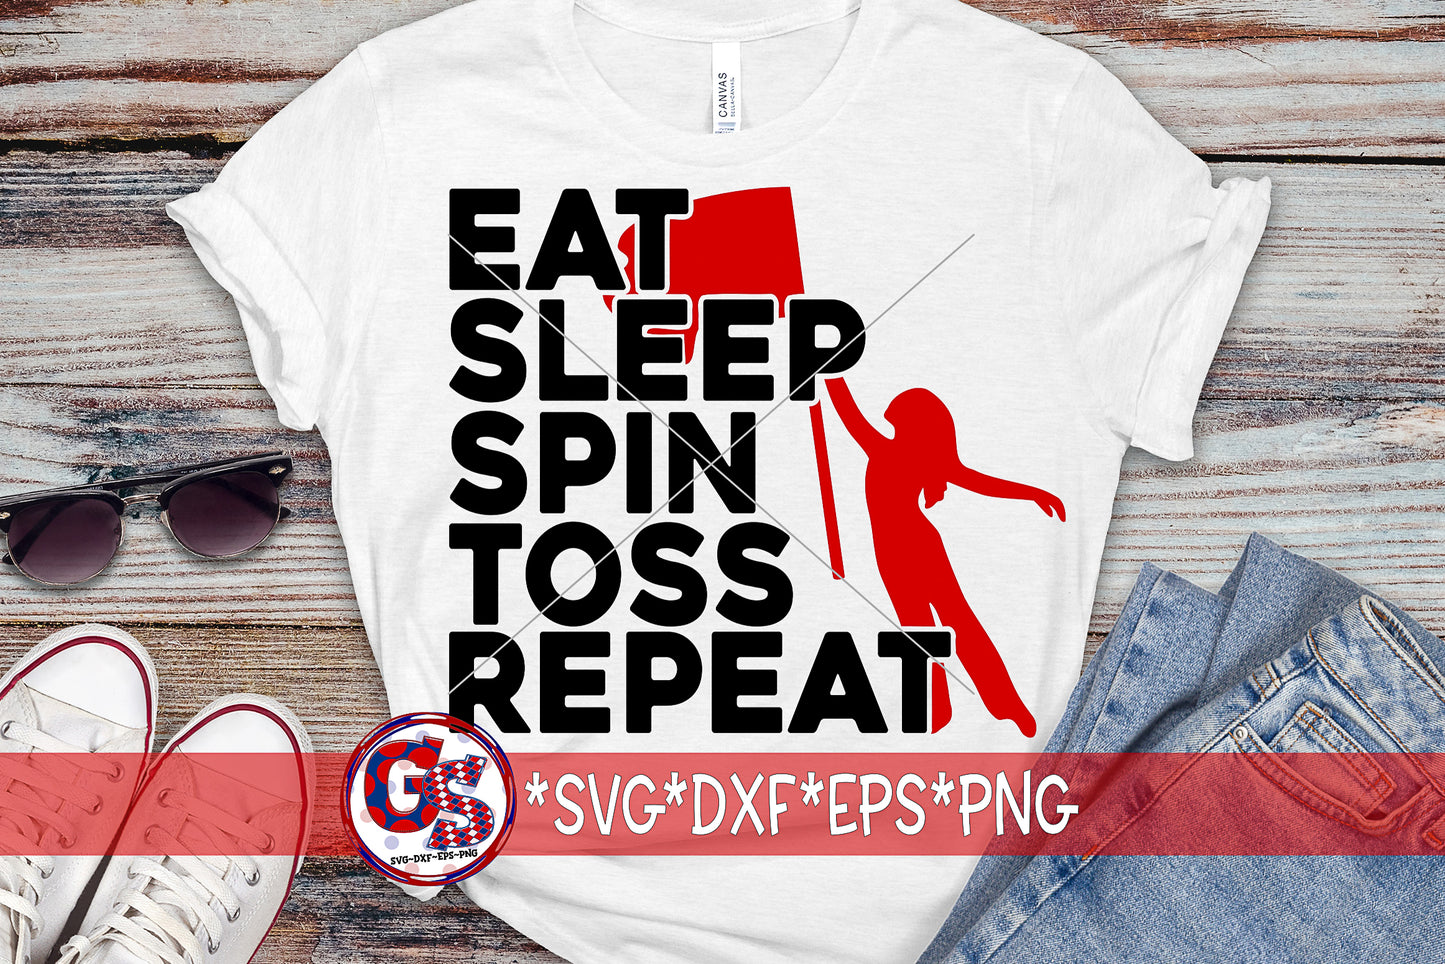 Eat Sleep Spin Toss Repeat SVG DXF EPS PNG